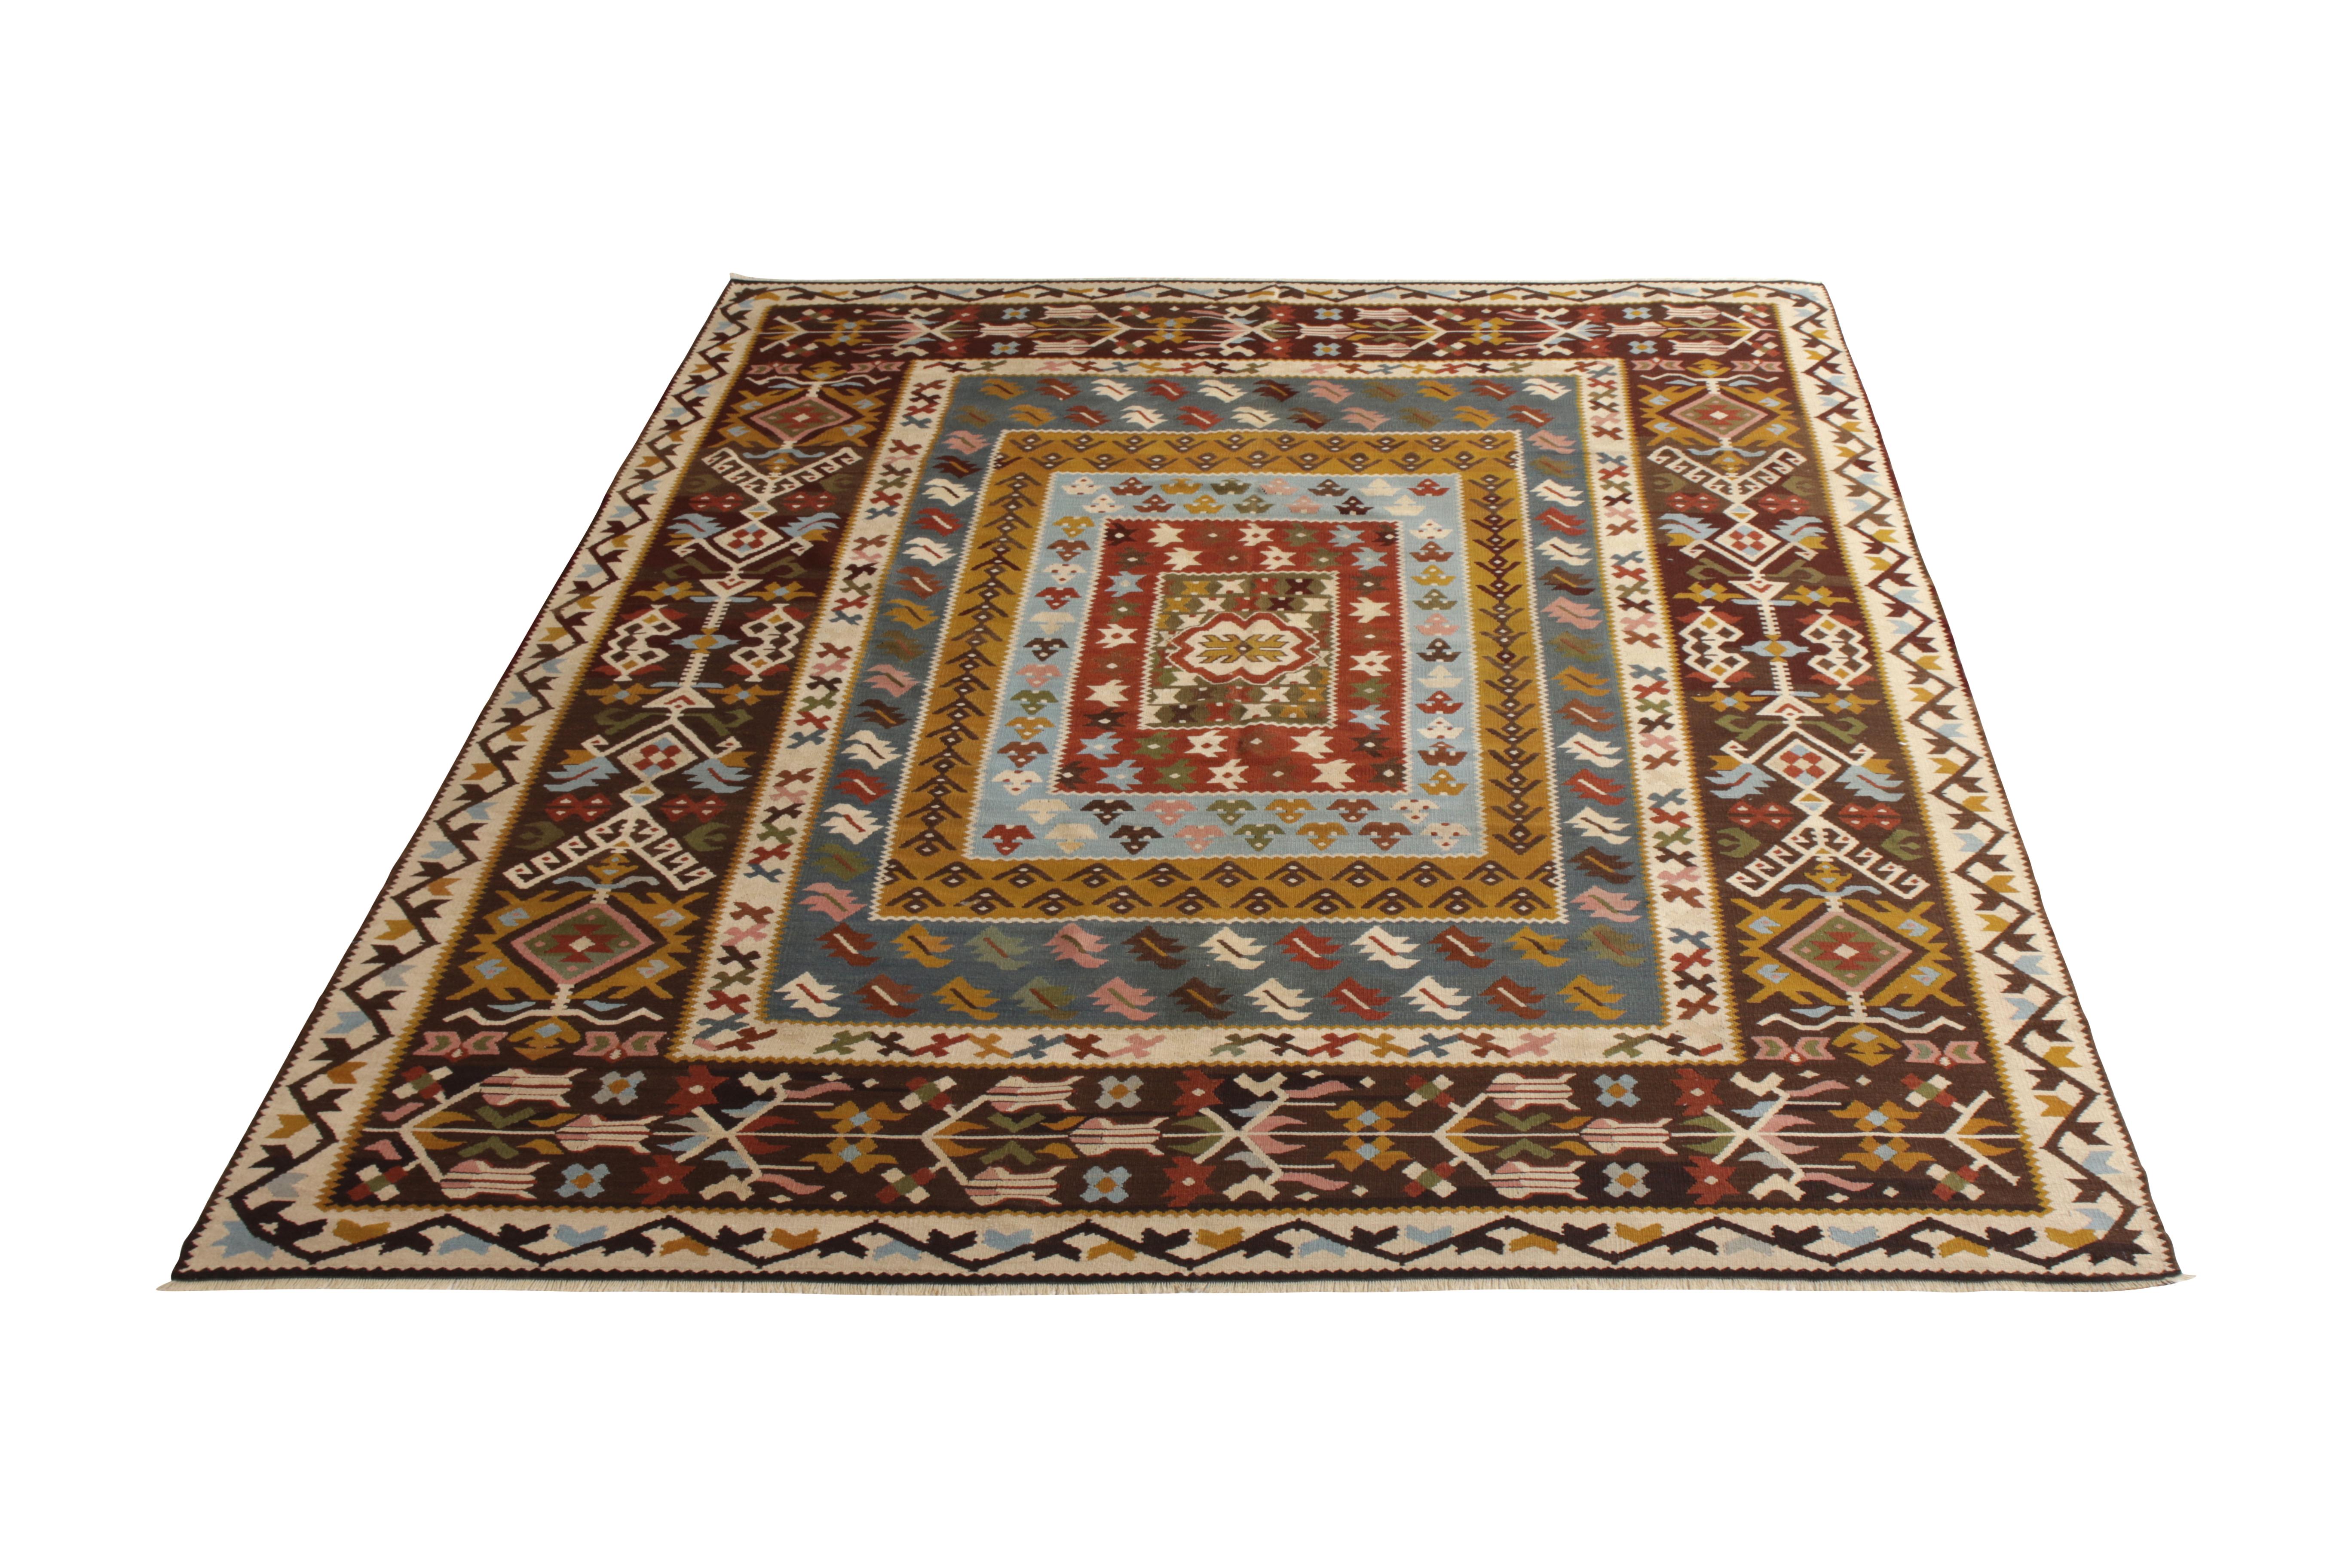 Handmade in flat-woven wool originating from Turkey circa 1920, this vintage rug is a mid-century Kilim rug of a dynamic nature, suspected to be of Albanian design influence in employing exciting accenting colors in the prevailing beige-brown and